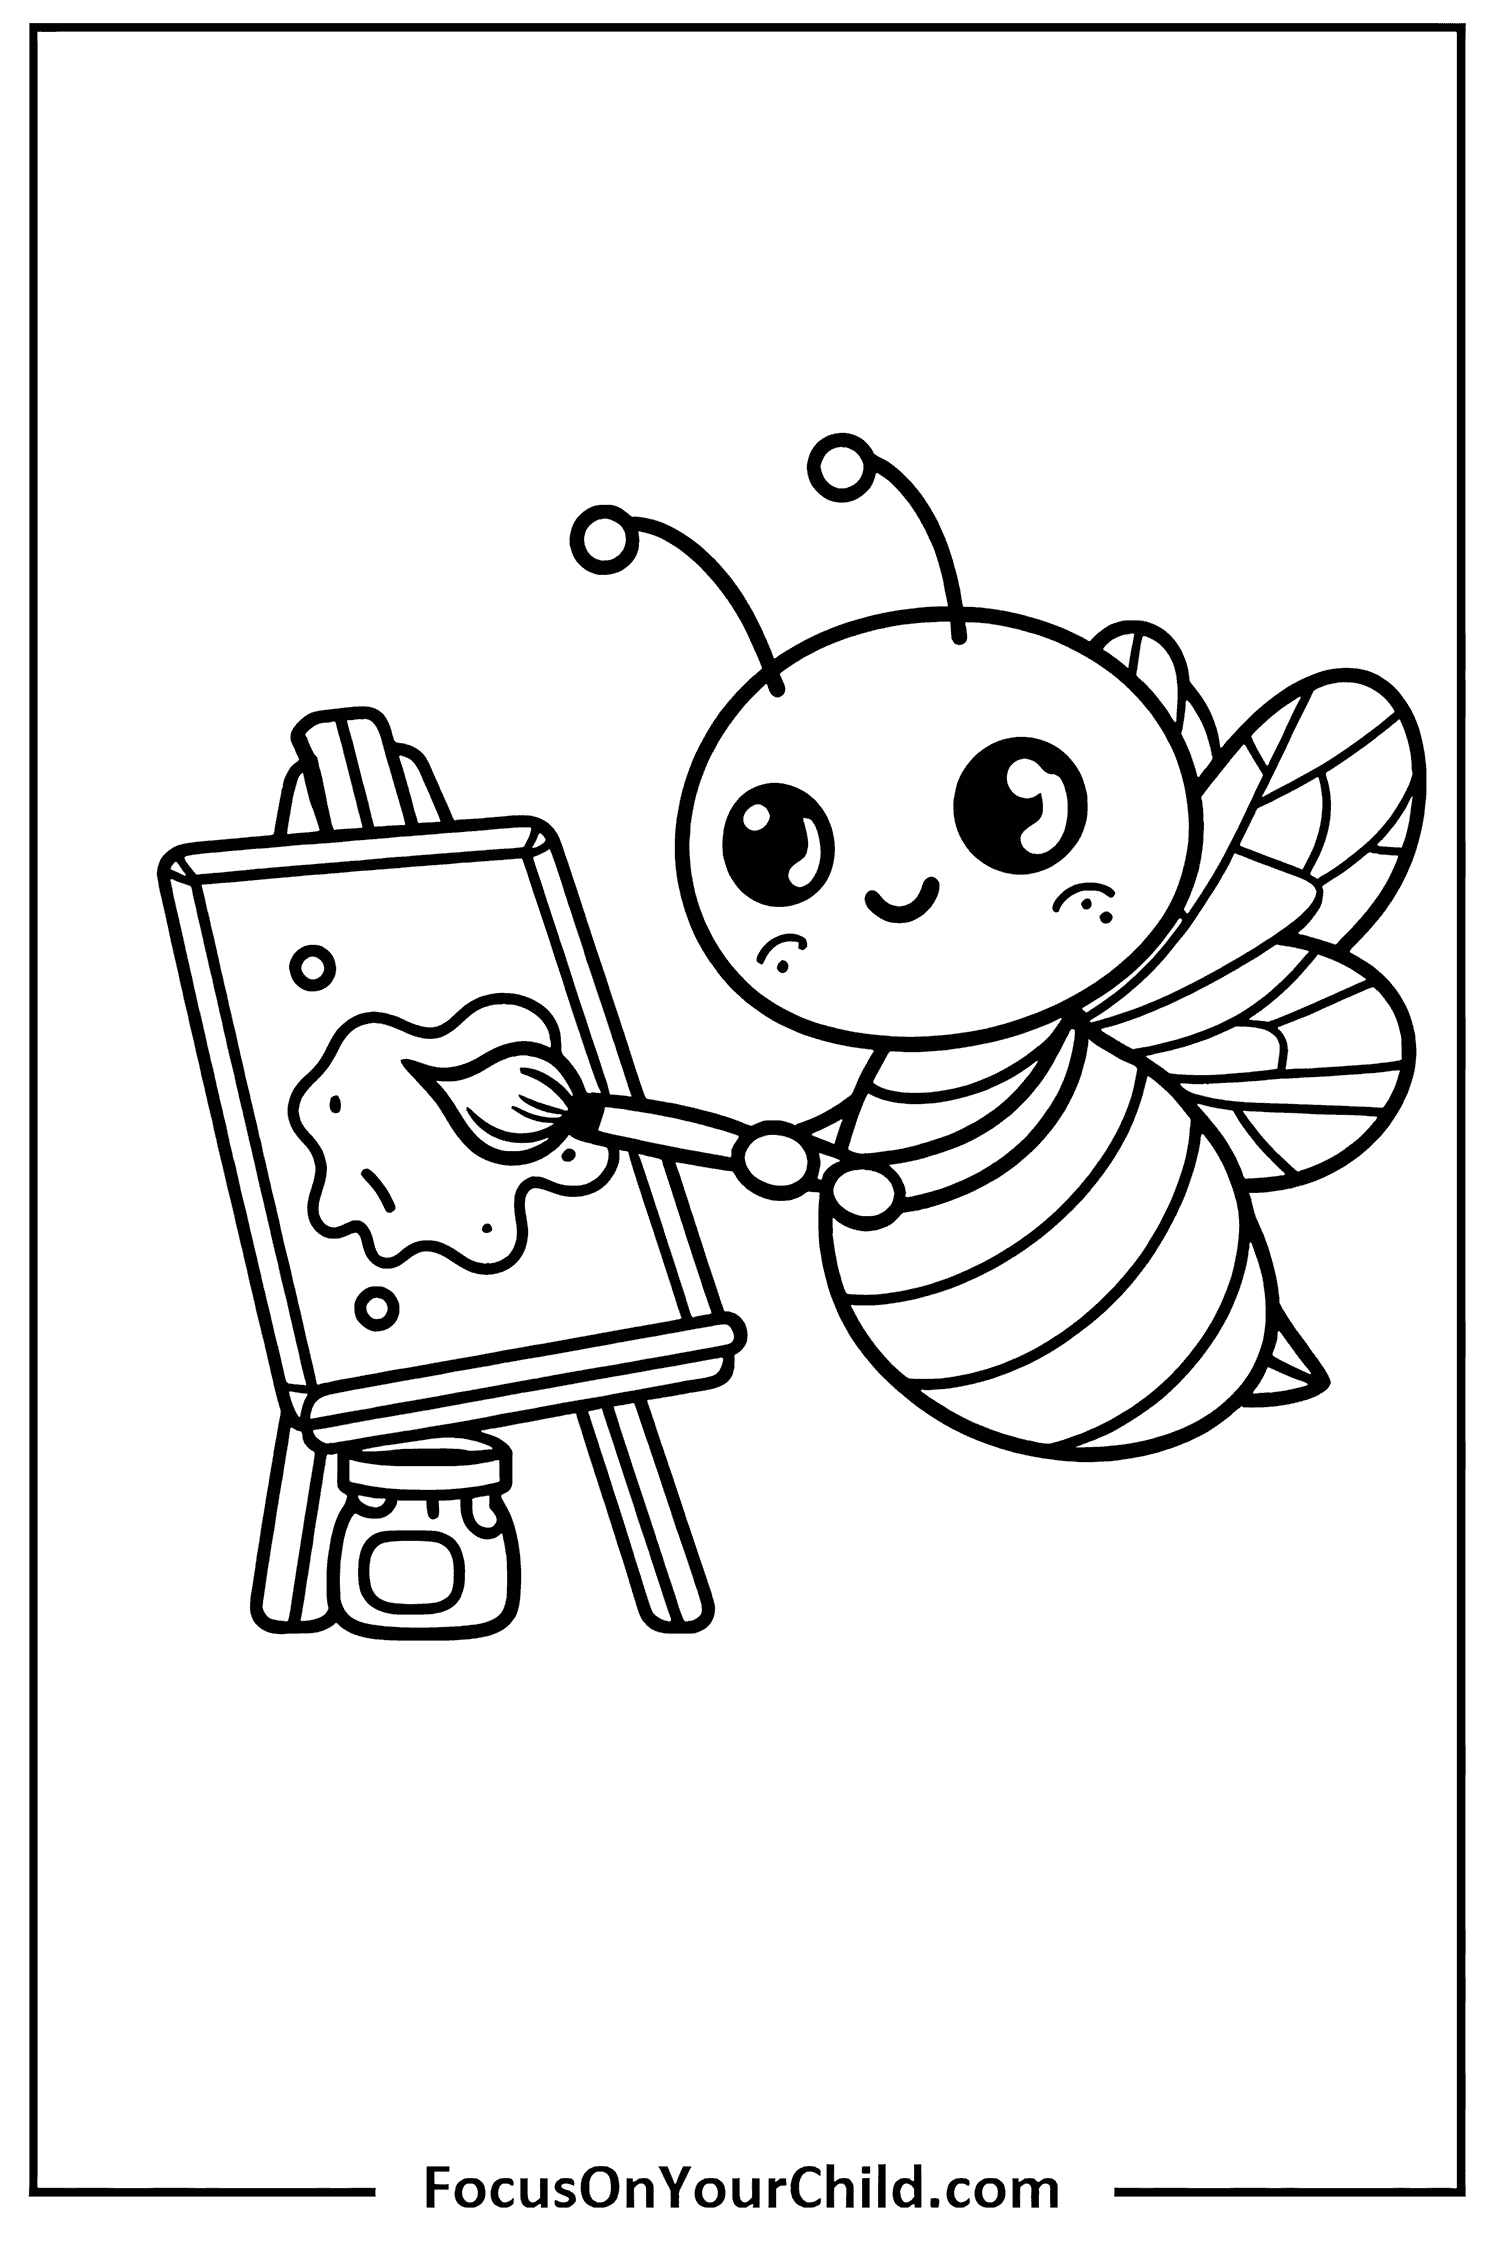 Whimsical cartoon bee painting on canvas for childrens coloring activity.